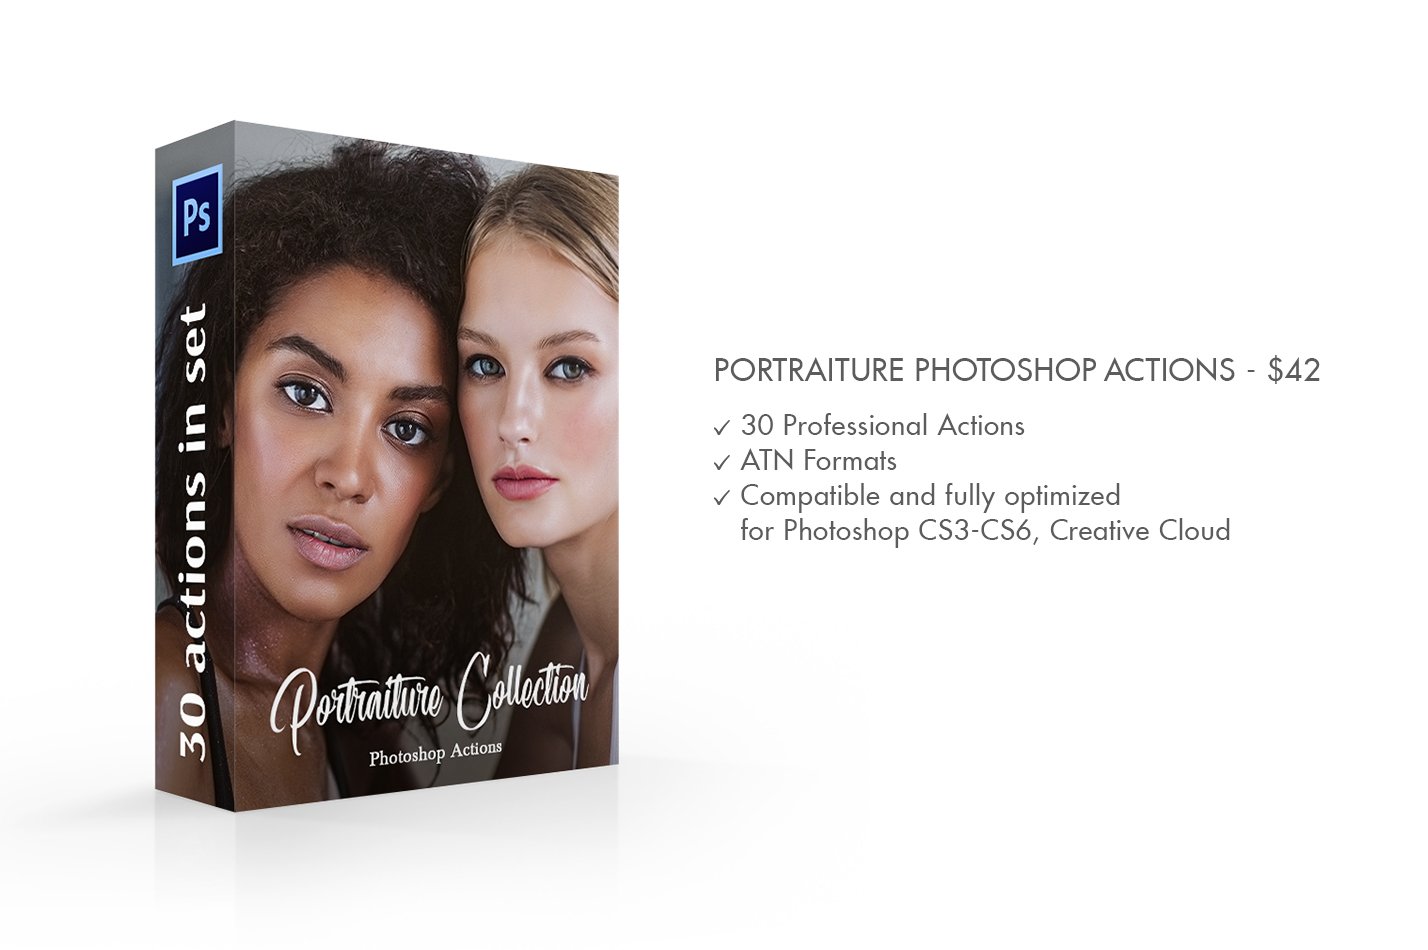 Portraiture Photoshop Actionspreview image.